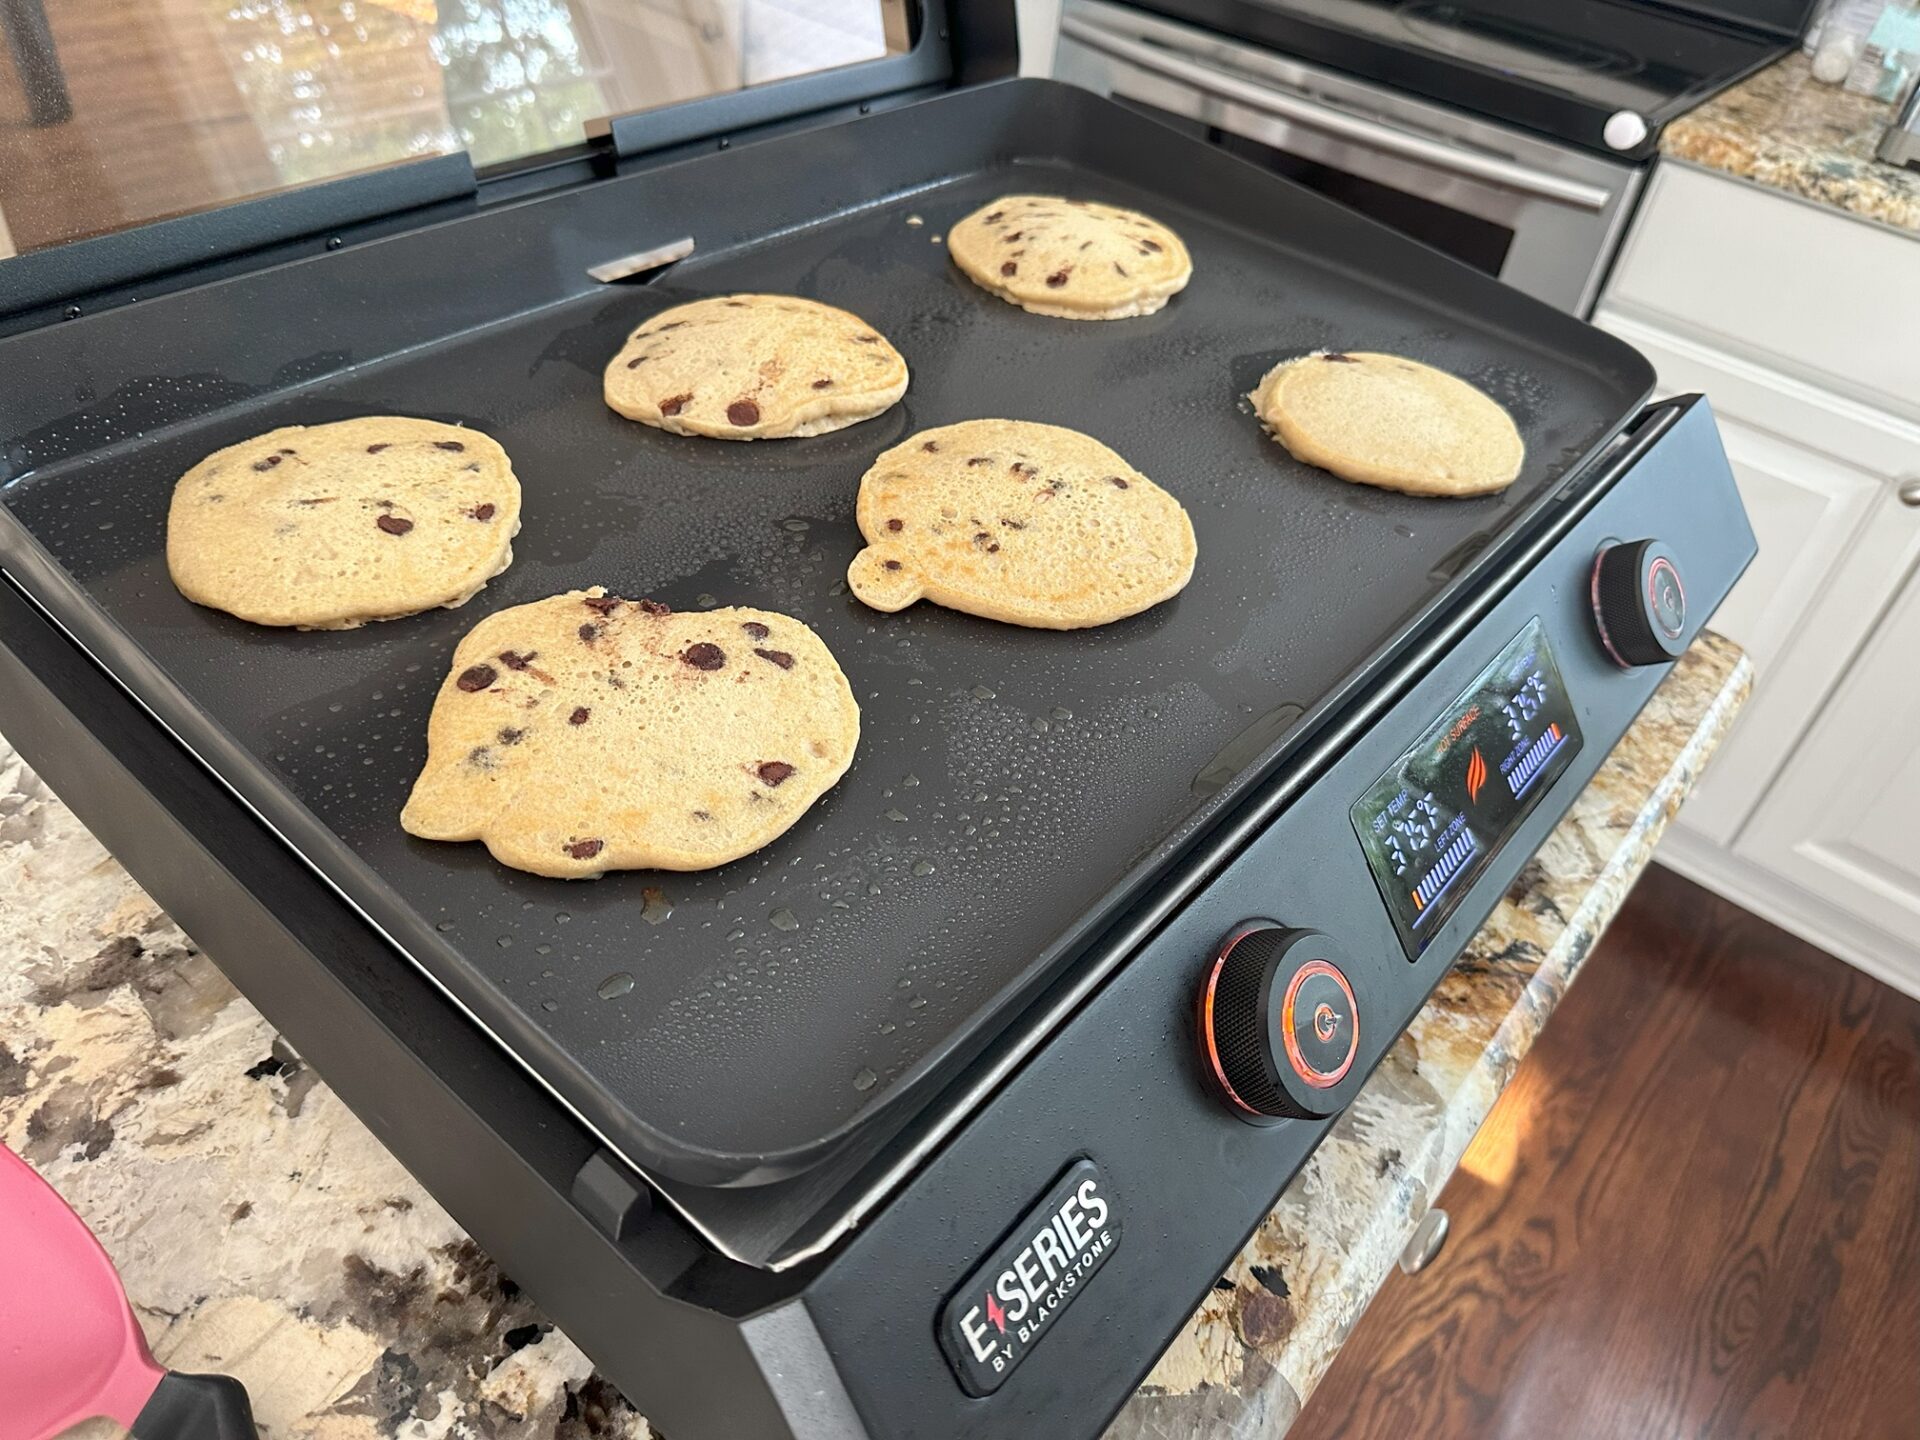 https://www.cookoutnews.com/wp-content/uploads/2023/11/Blackstone-Electric-Griddle-E-Series-Cooking-Pancakes.jpg